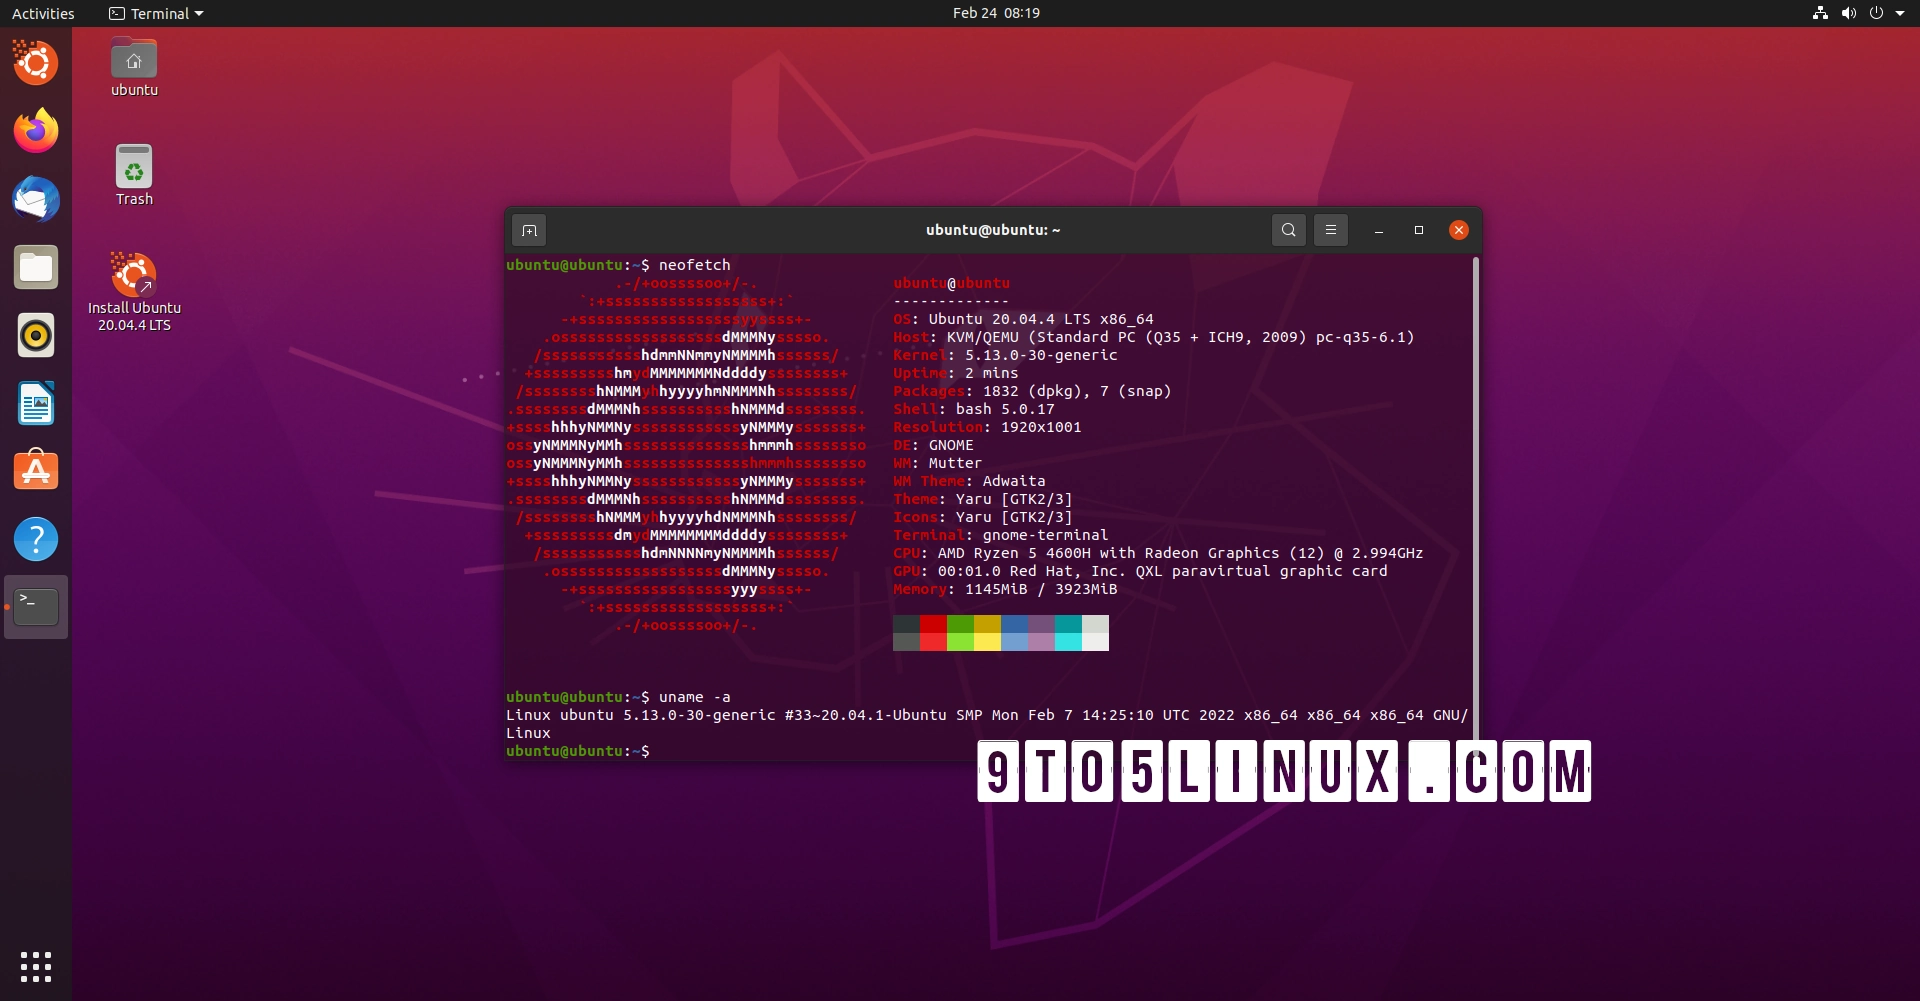 Ubuntu 20.04.4 LTS Released with Linux Kernel 5.13 and Mesa 21.2 from Ubuntu 21.10